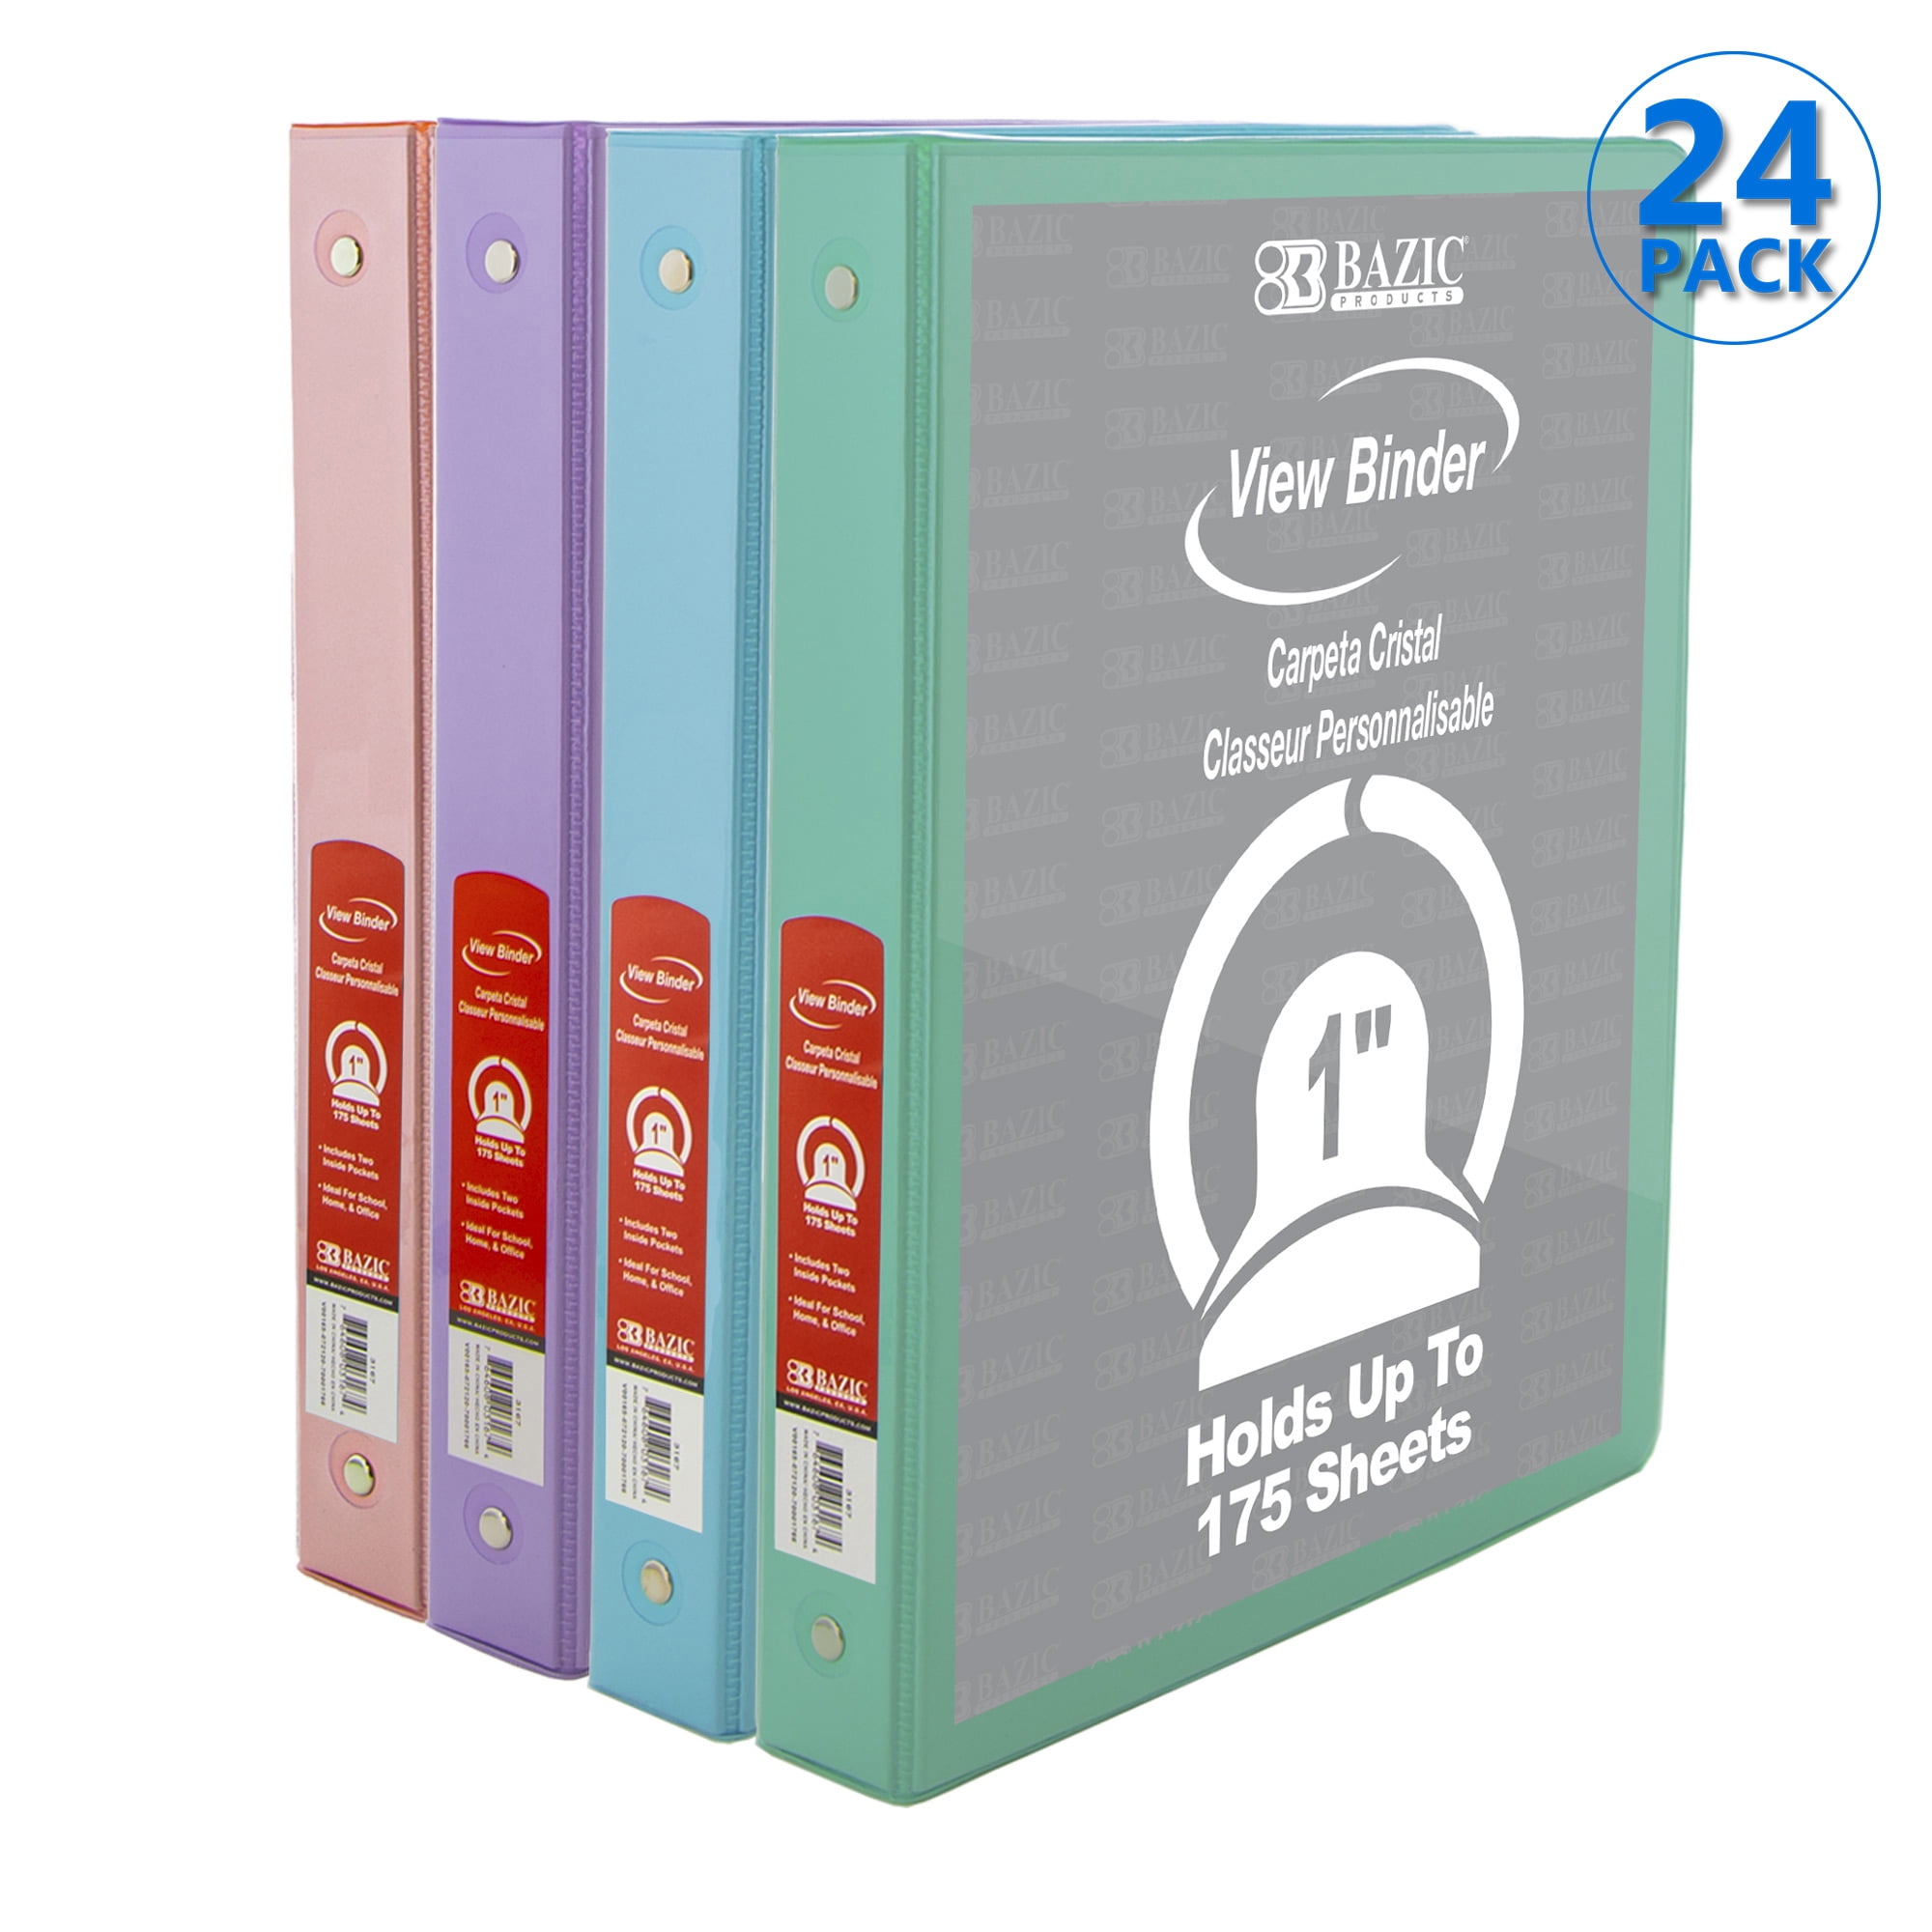 for School Office Home Assorted Color 4-Count BAZIC 3 Ring Binder 1.5 Economy Binders Organizer Round Ring Hold 280 Sheets Paper 